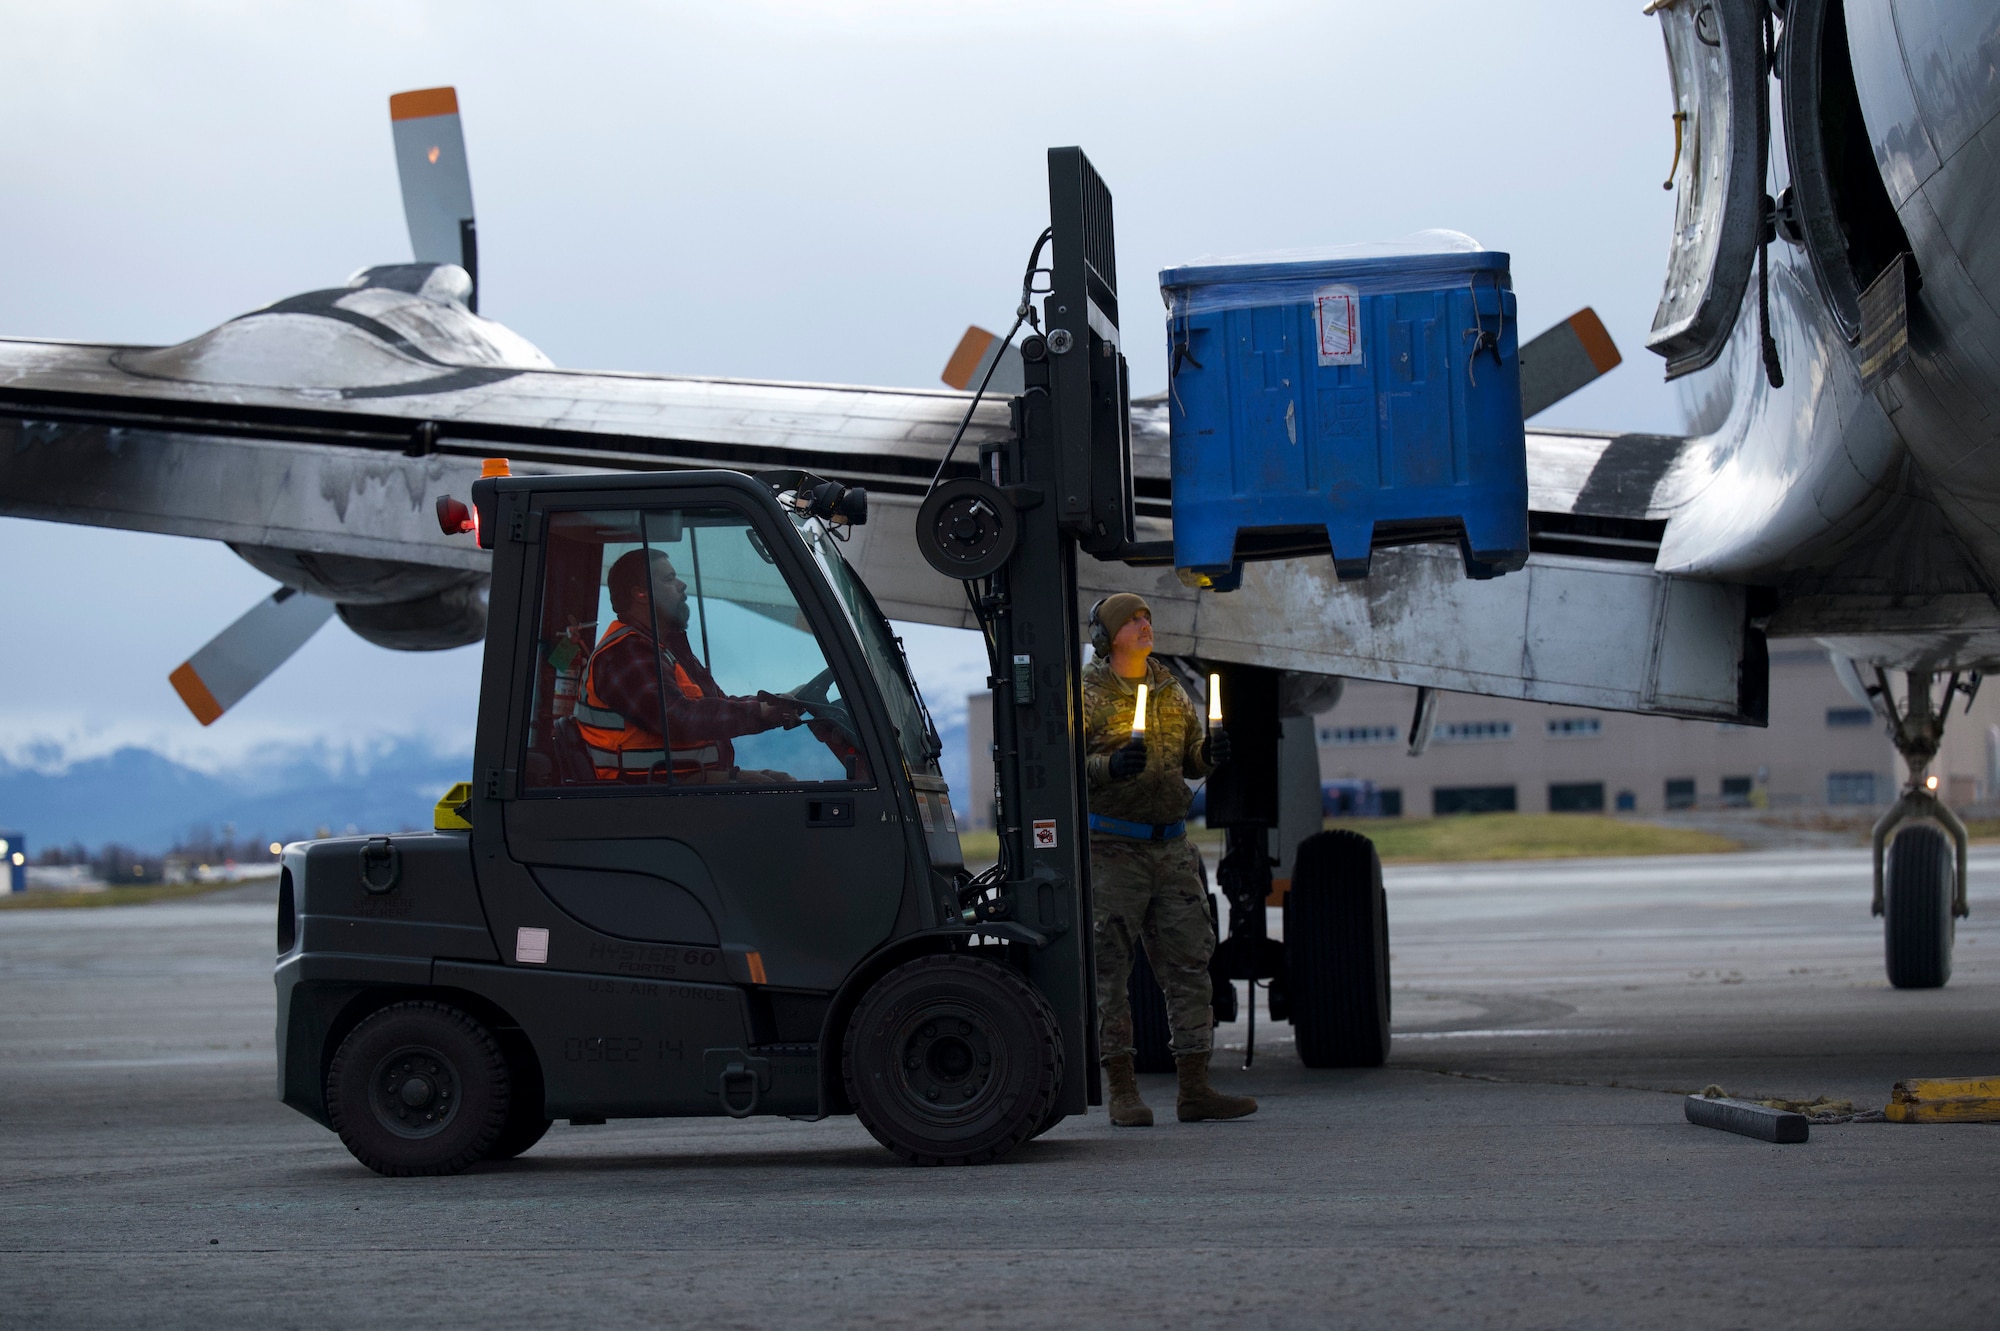 Air Force Staff Sgt. Timothy Barnwell and Timothy Murray load rations onto a Douglas DC-6 to deliver to a Long Range Radar Site during Nodal Lightning exercise at Ted Steven International Airport in Anchorage, Alaska, Oct. 19, 2021. he Nodal Lightning exercise allowed the 732nd AMS personnel to respond efficiently and effectively to contested or degraded contingency environments. Barnwell and Murray are assigned to the 732nd Air Mobility Squadron as freight supervisor and motor vehicle operator, respectively.